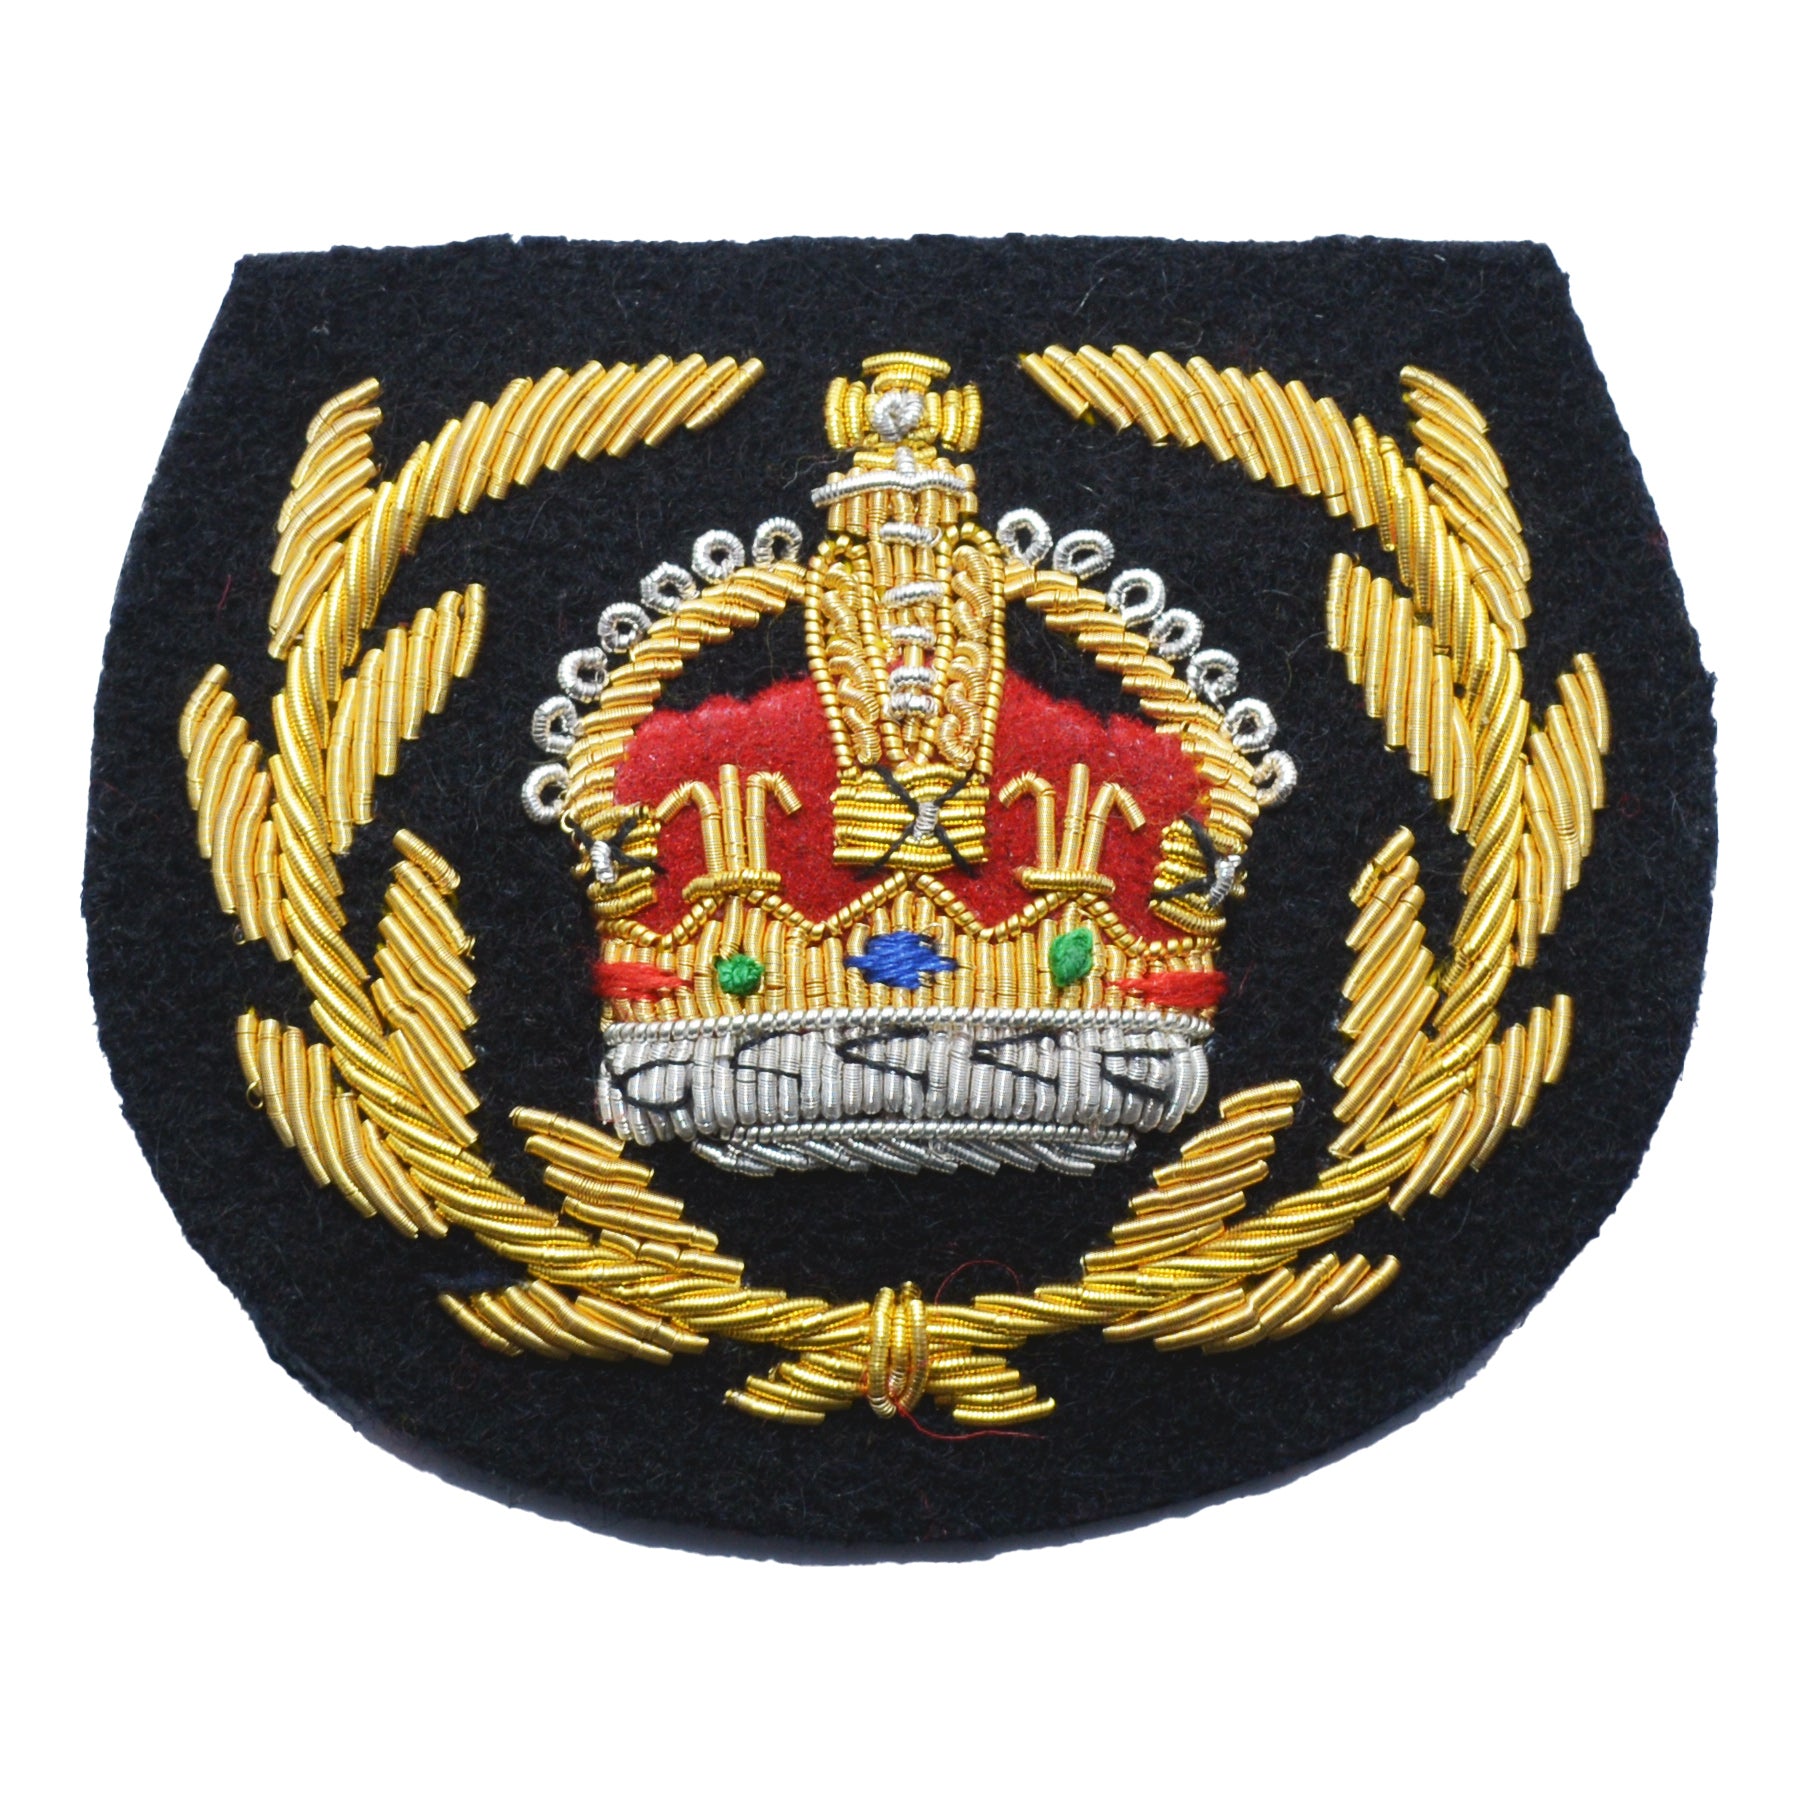 (King's Crown) Warrant Officer Class 2 (WO2) NCO Rank Badge Royal Tank Regiment (RTR) British Army Badge